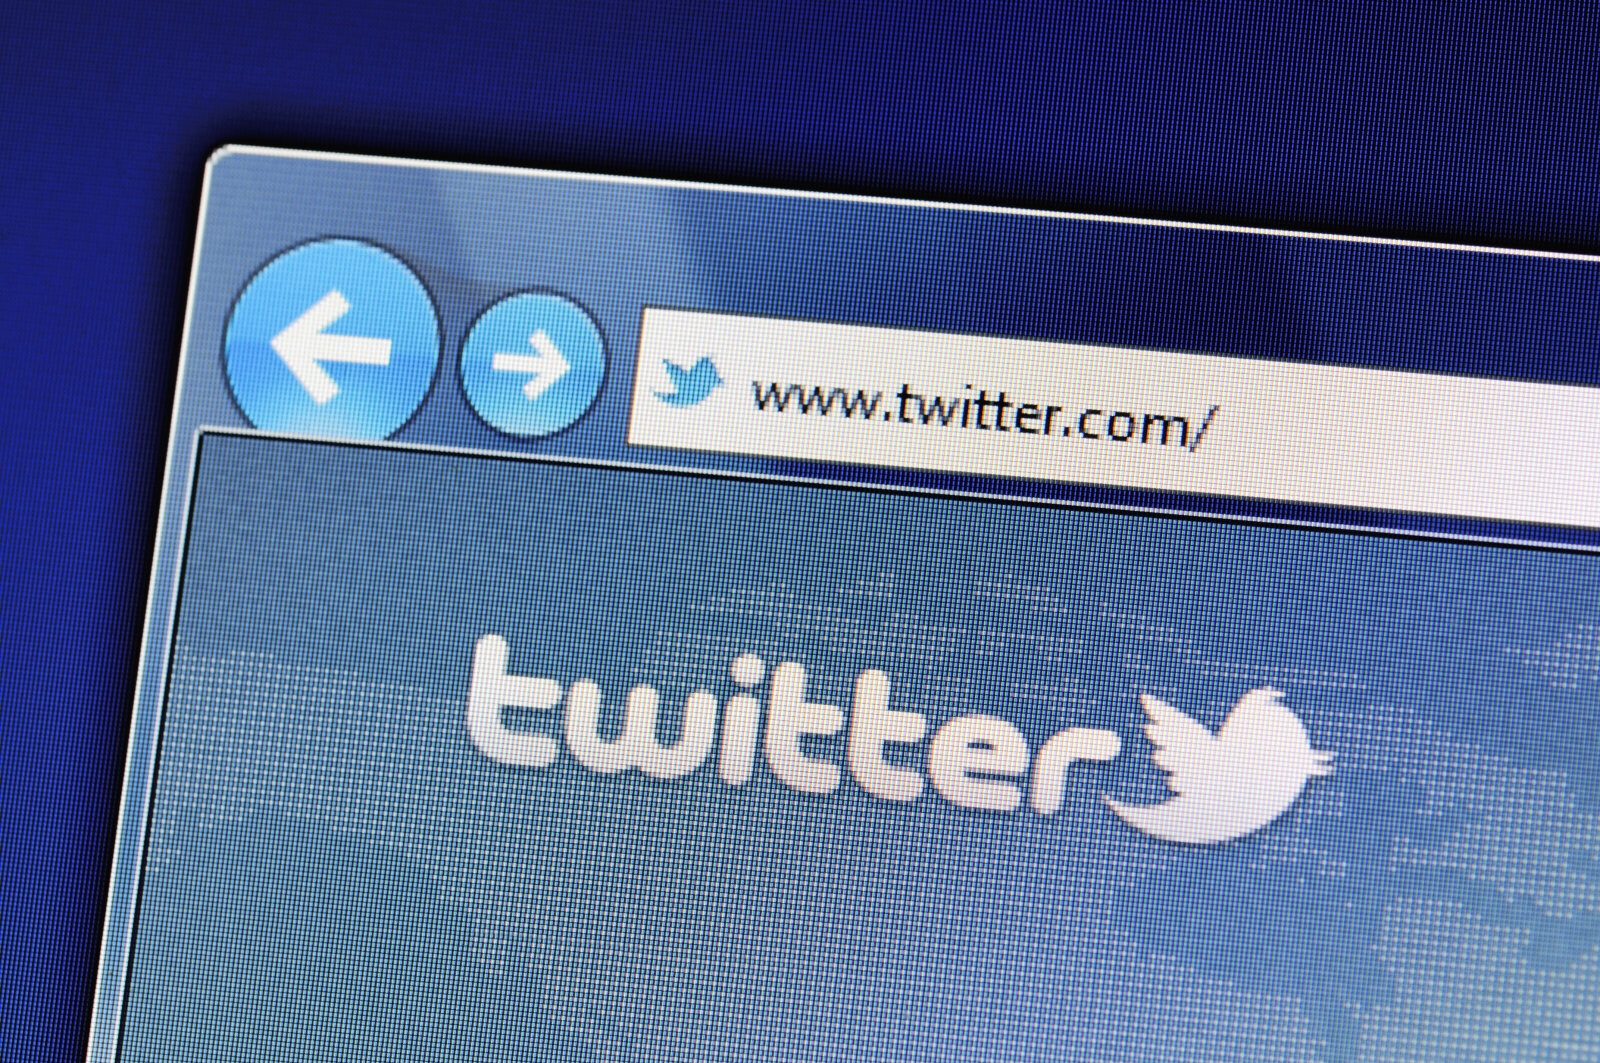 Twitter posts profits for the first time, but still can’t grow user base